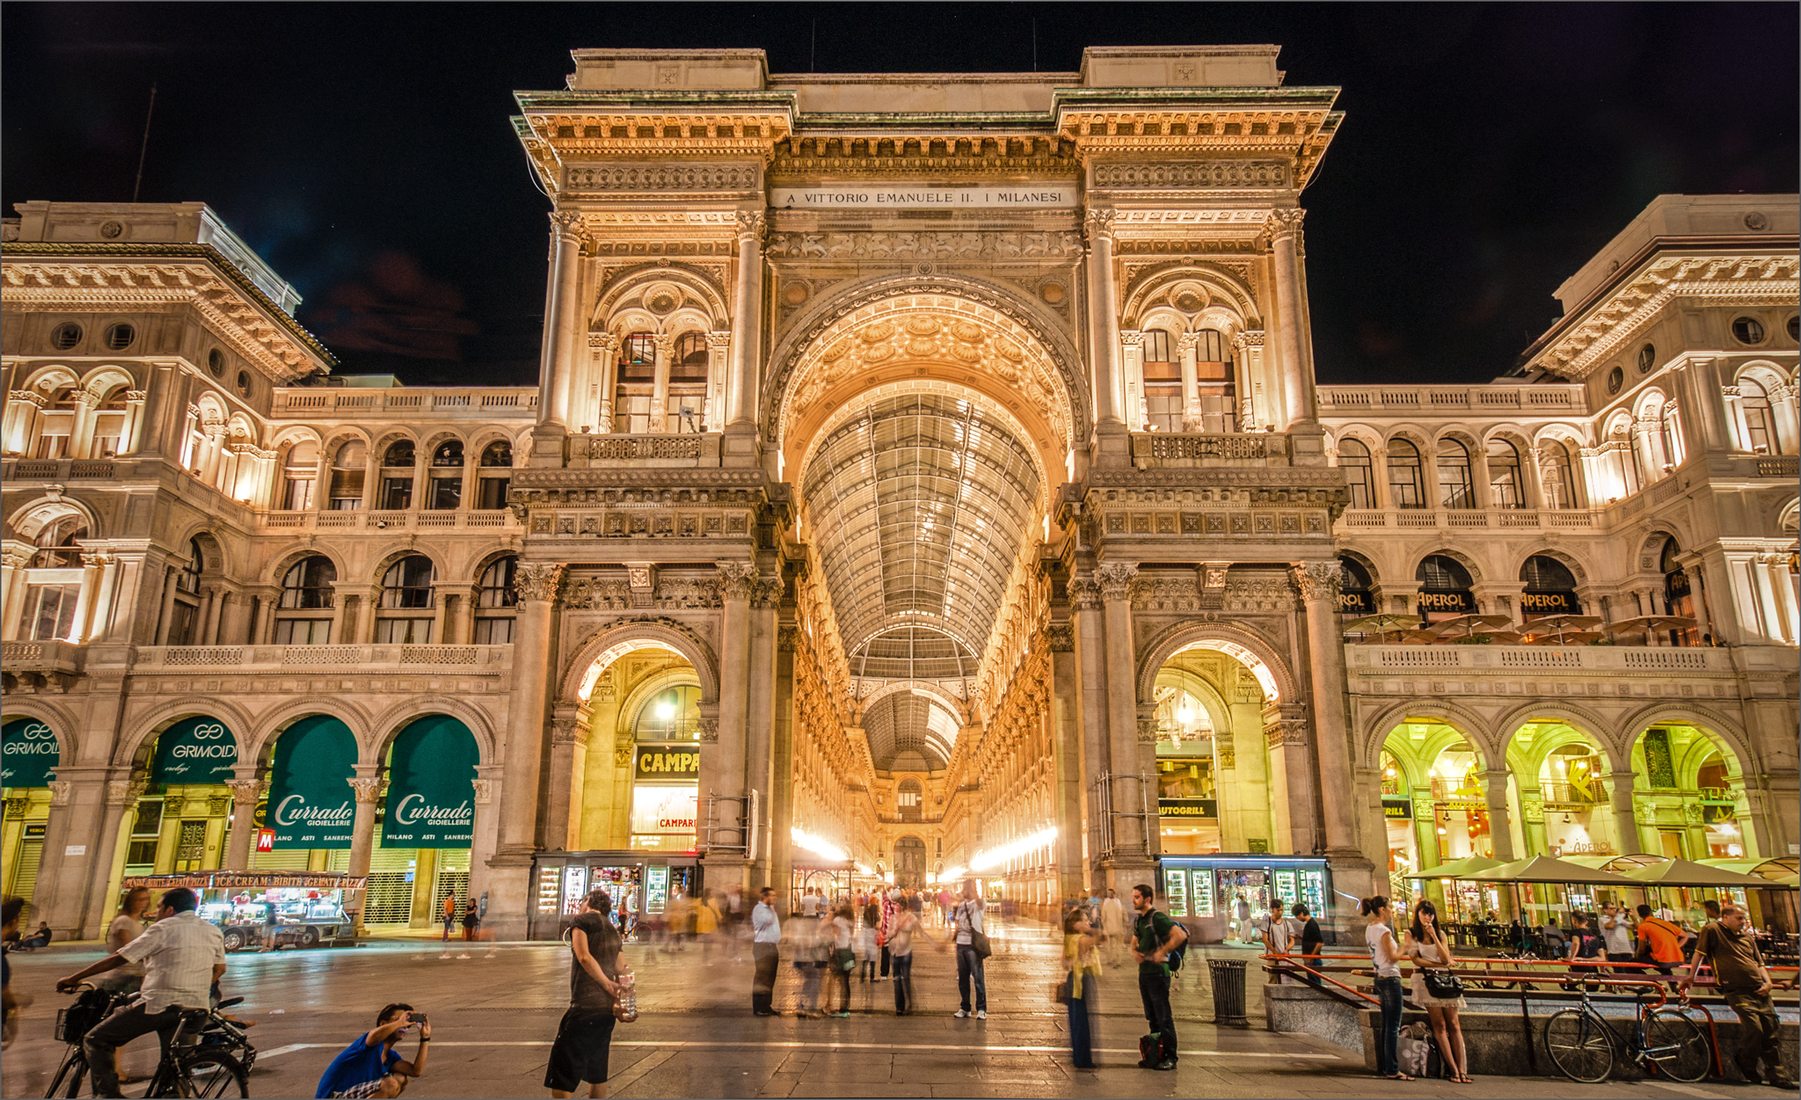 Arch at the entrance to the Galleria Vittorio Emanuele II at night